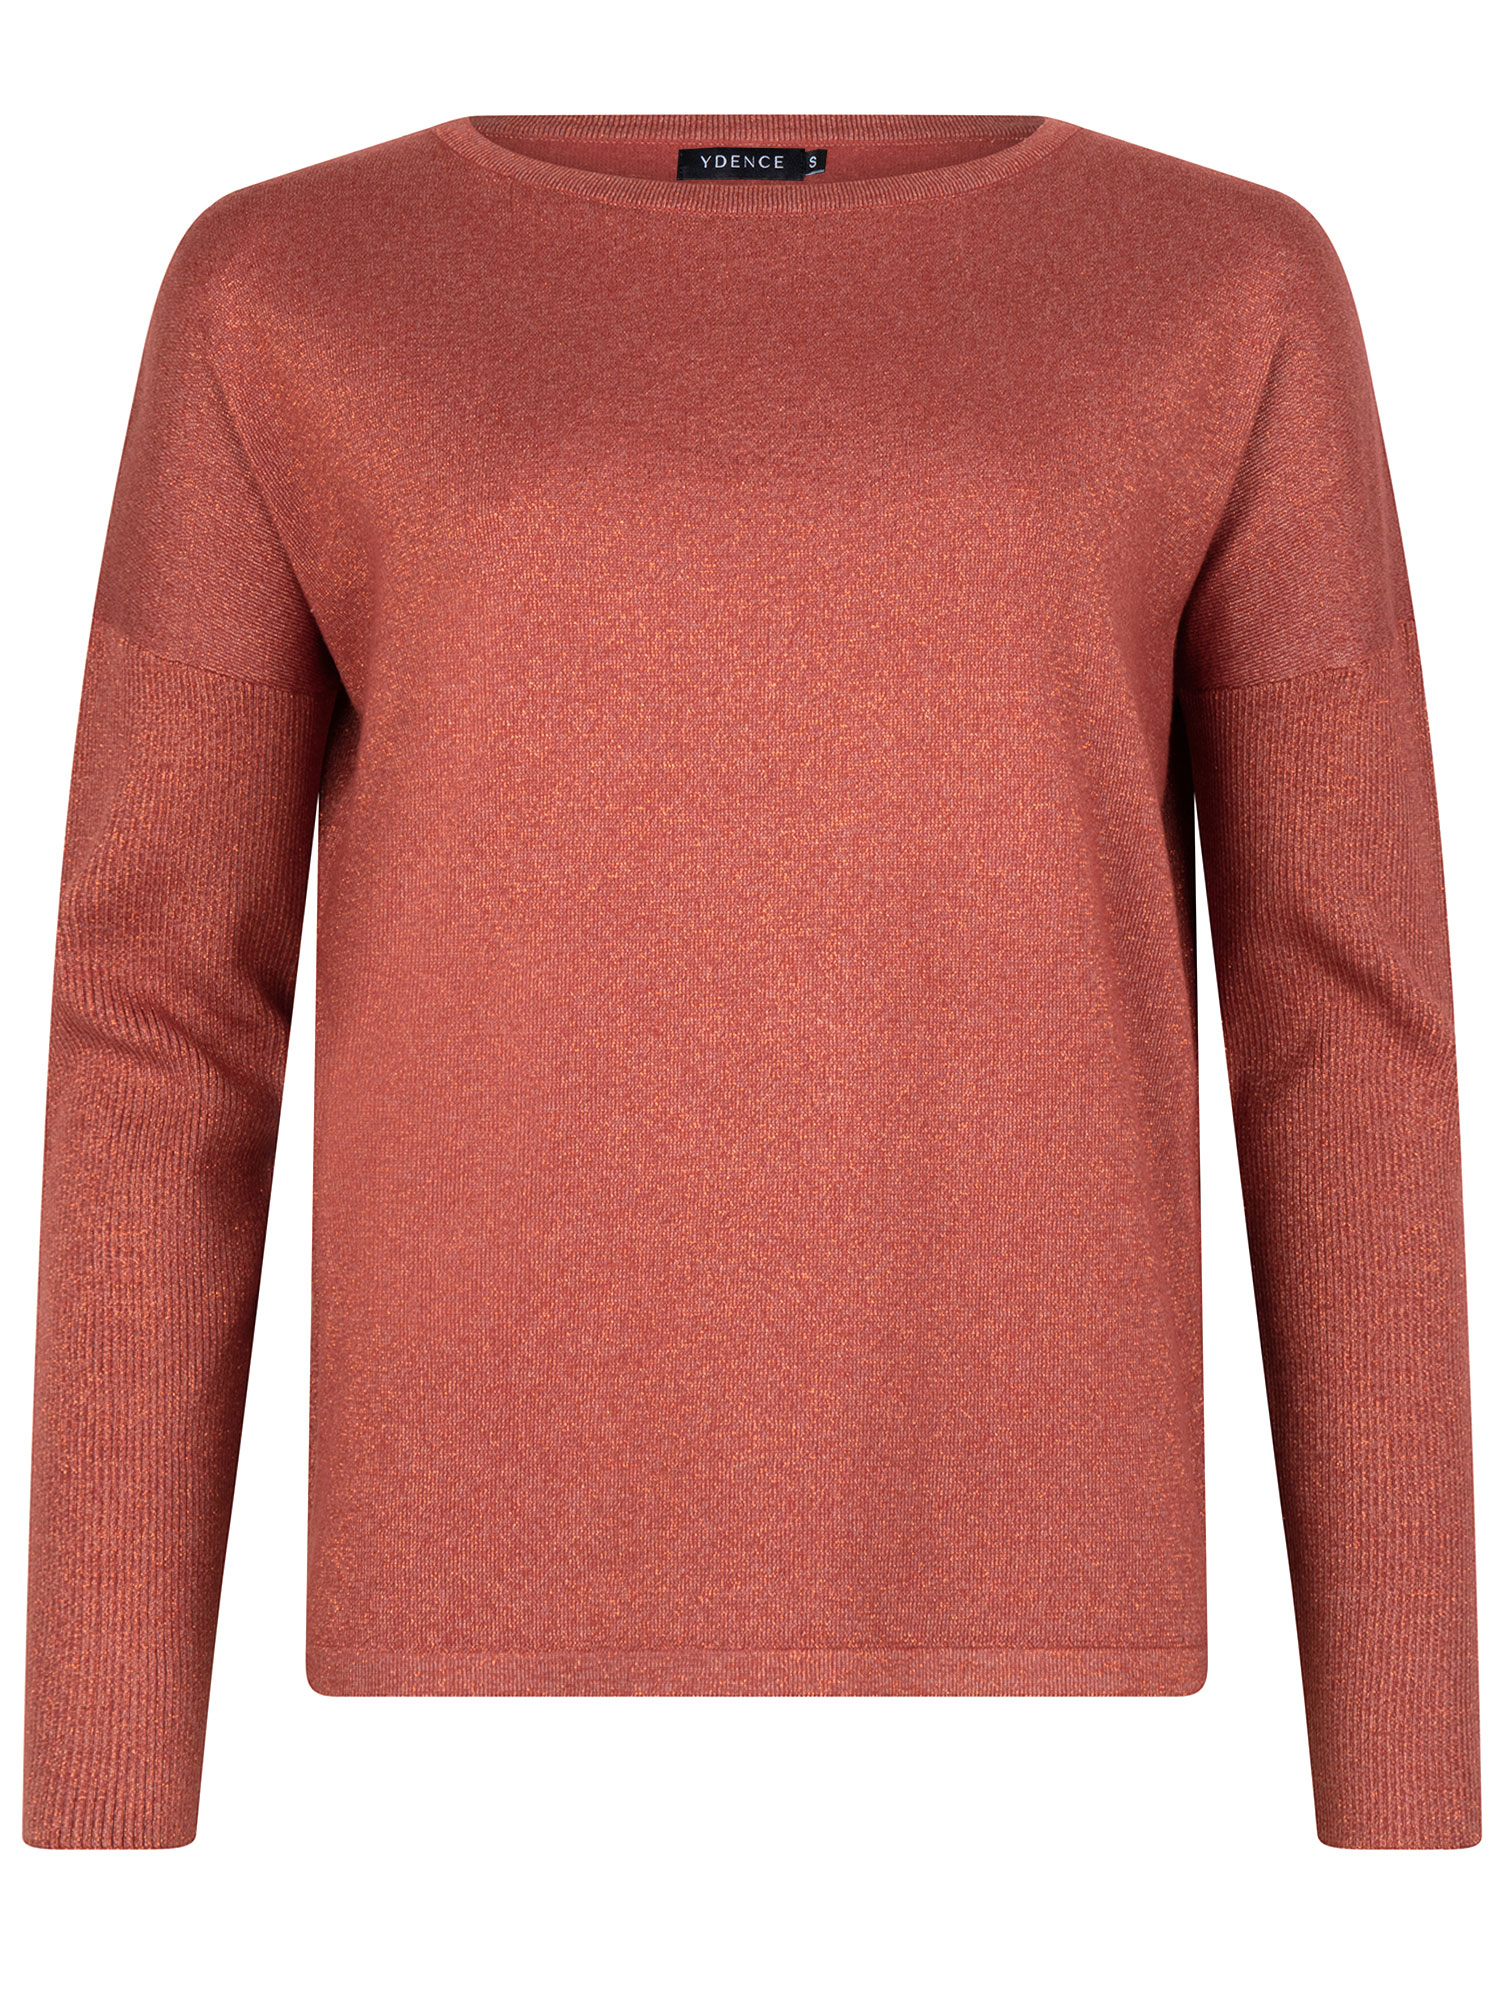 Ydence Knitted top Lani Copper